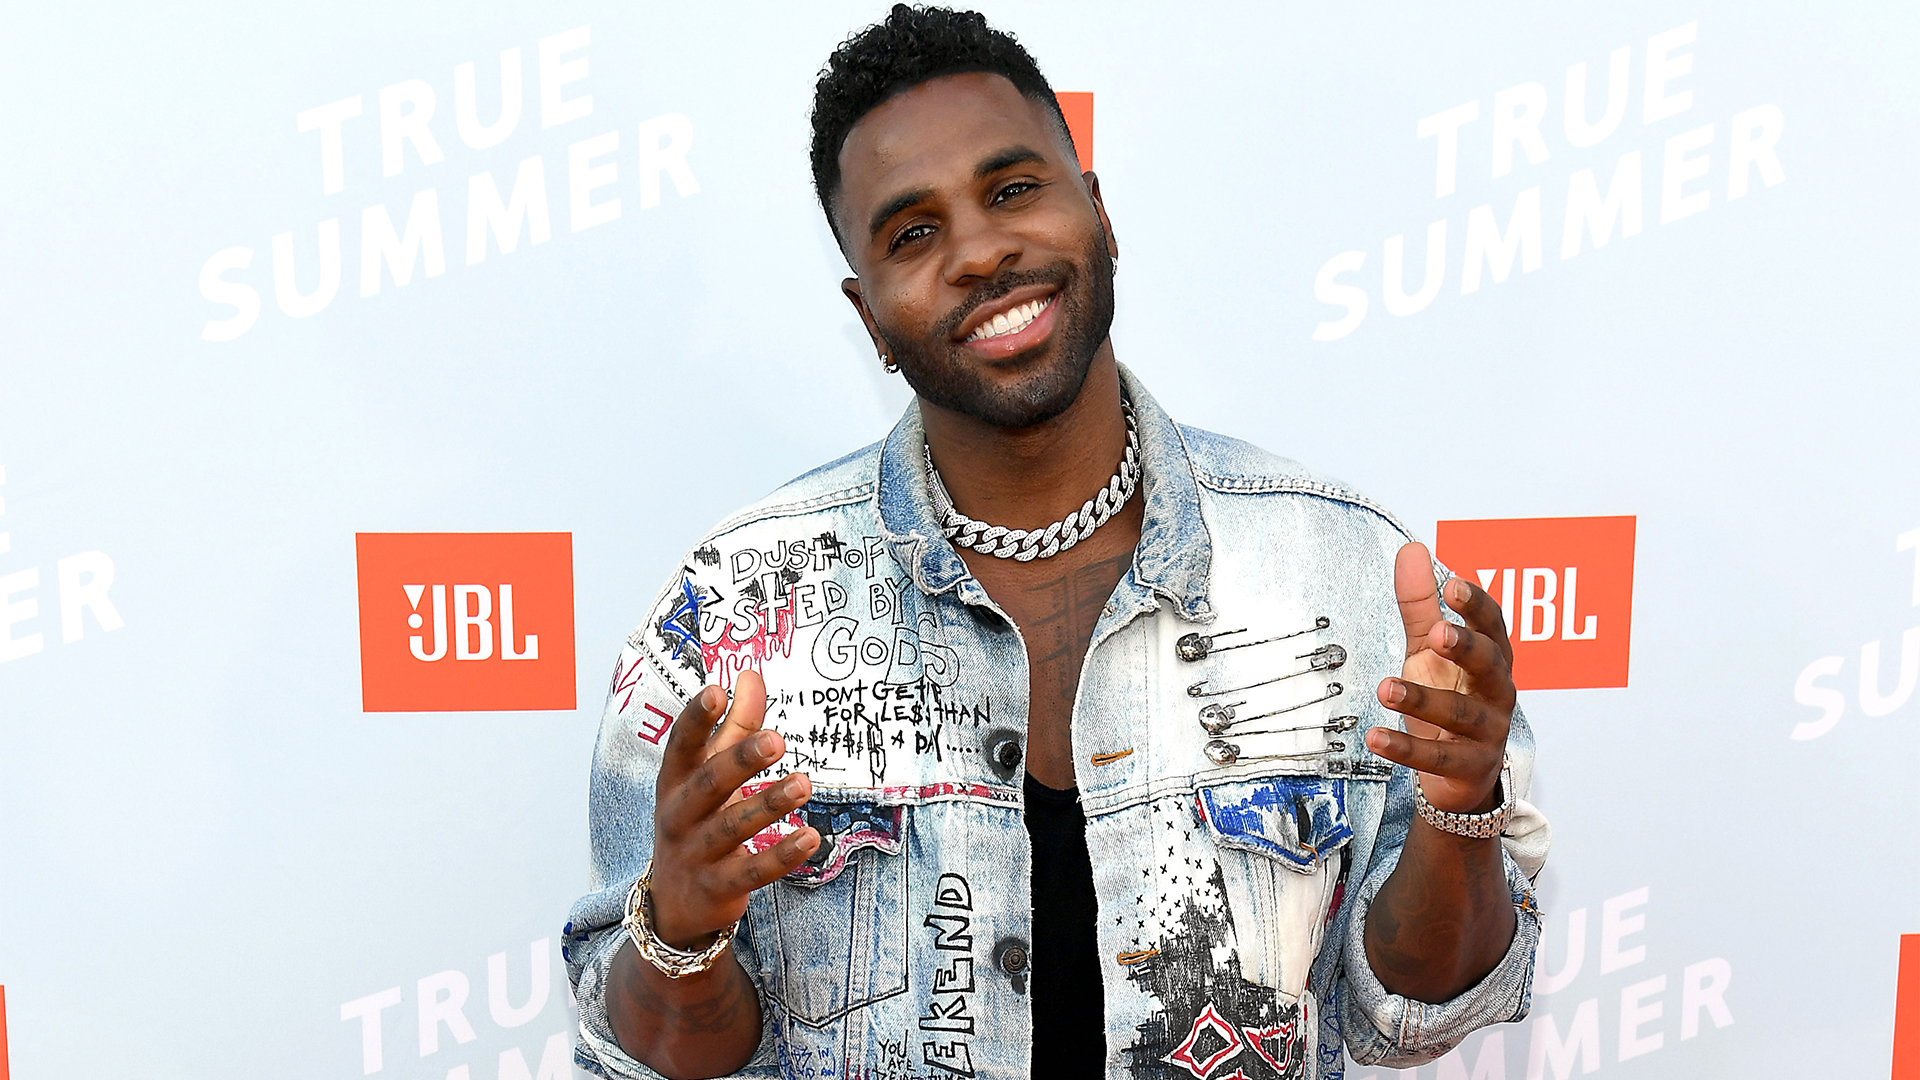 Twitter To Test Out Its Livestream Shopping Platform With Jason Derulo As Host